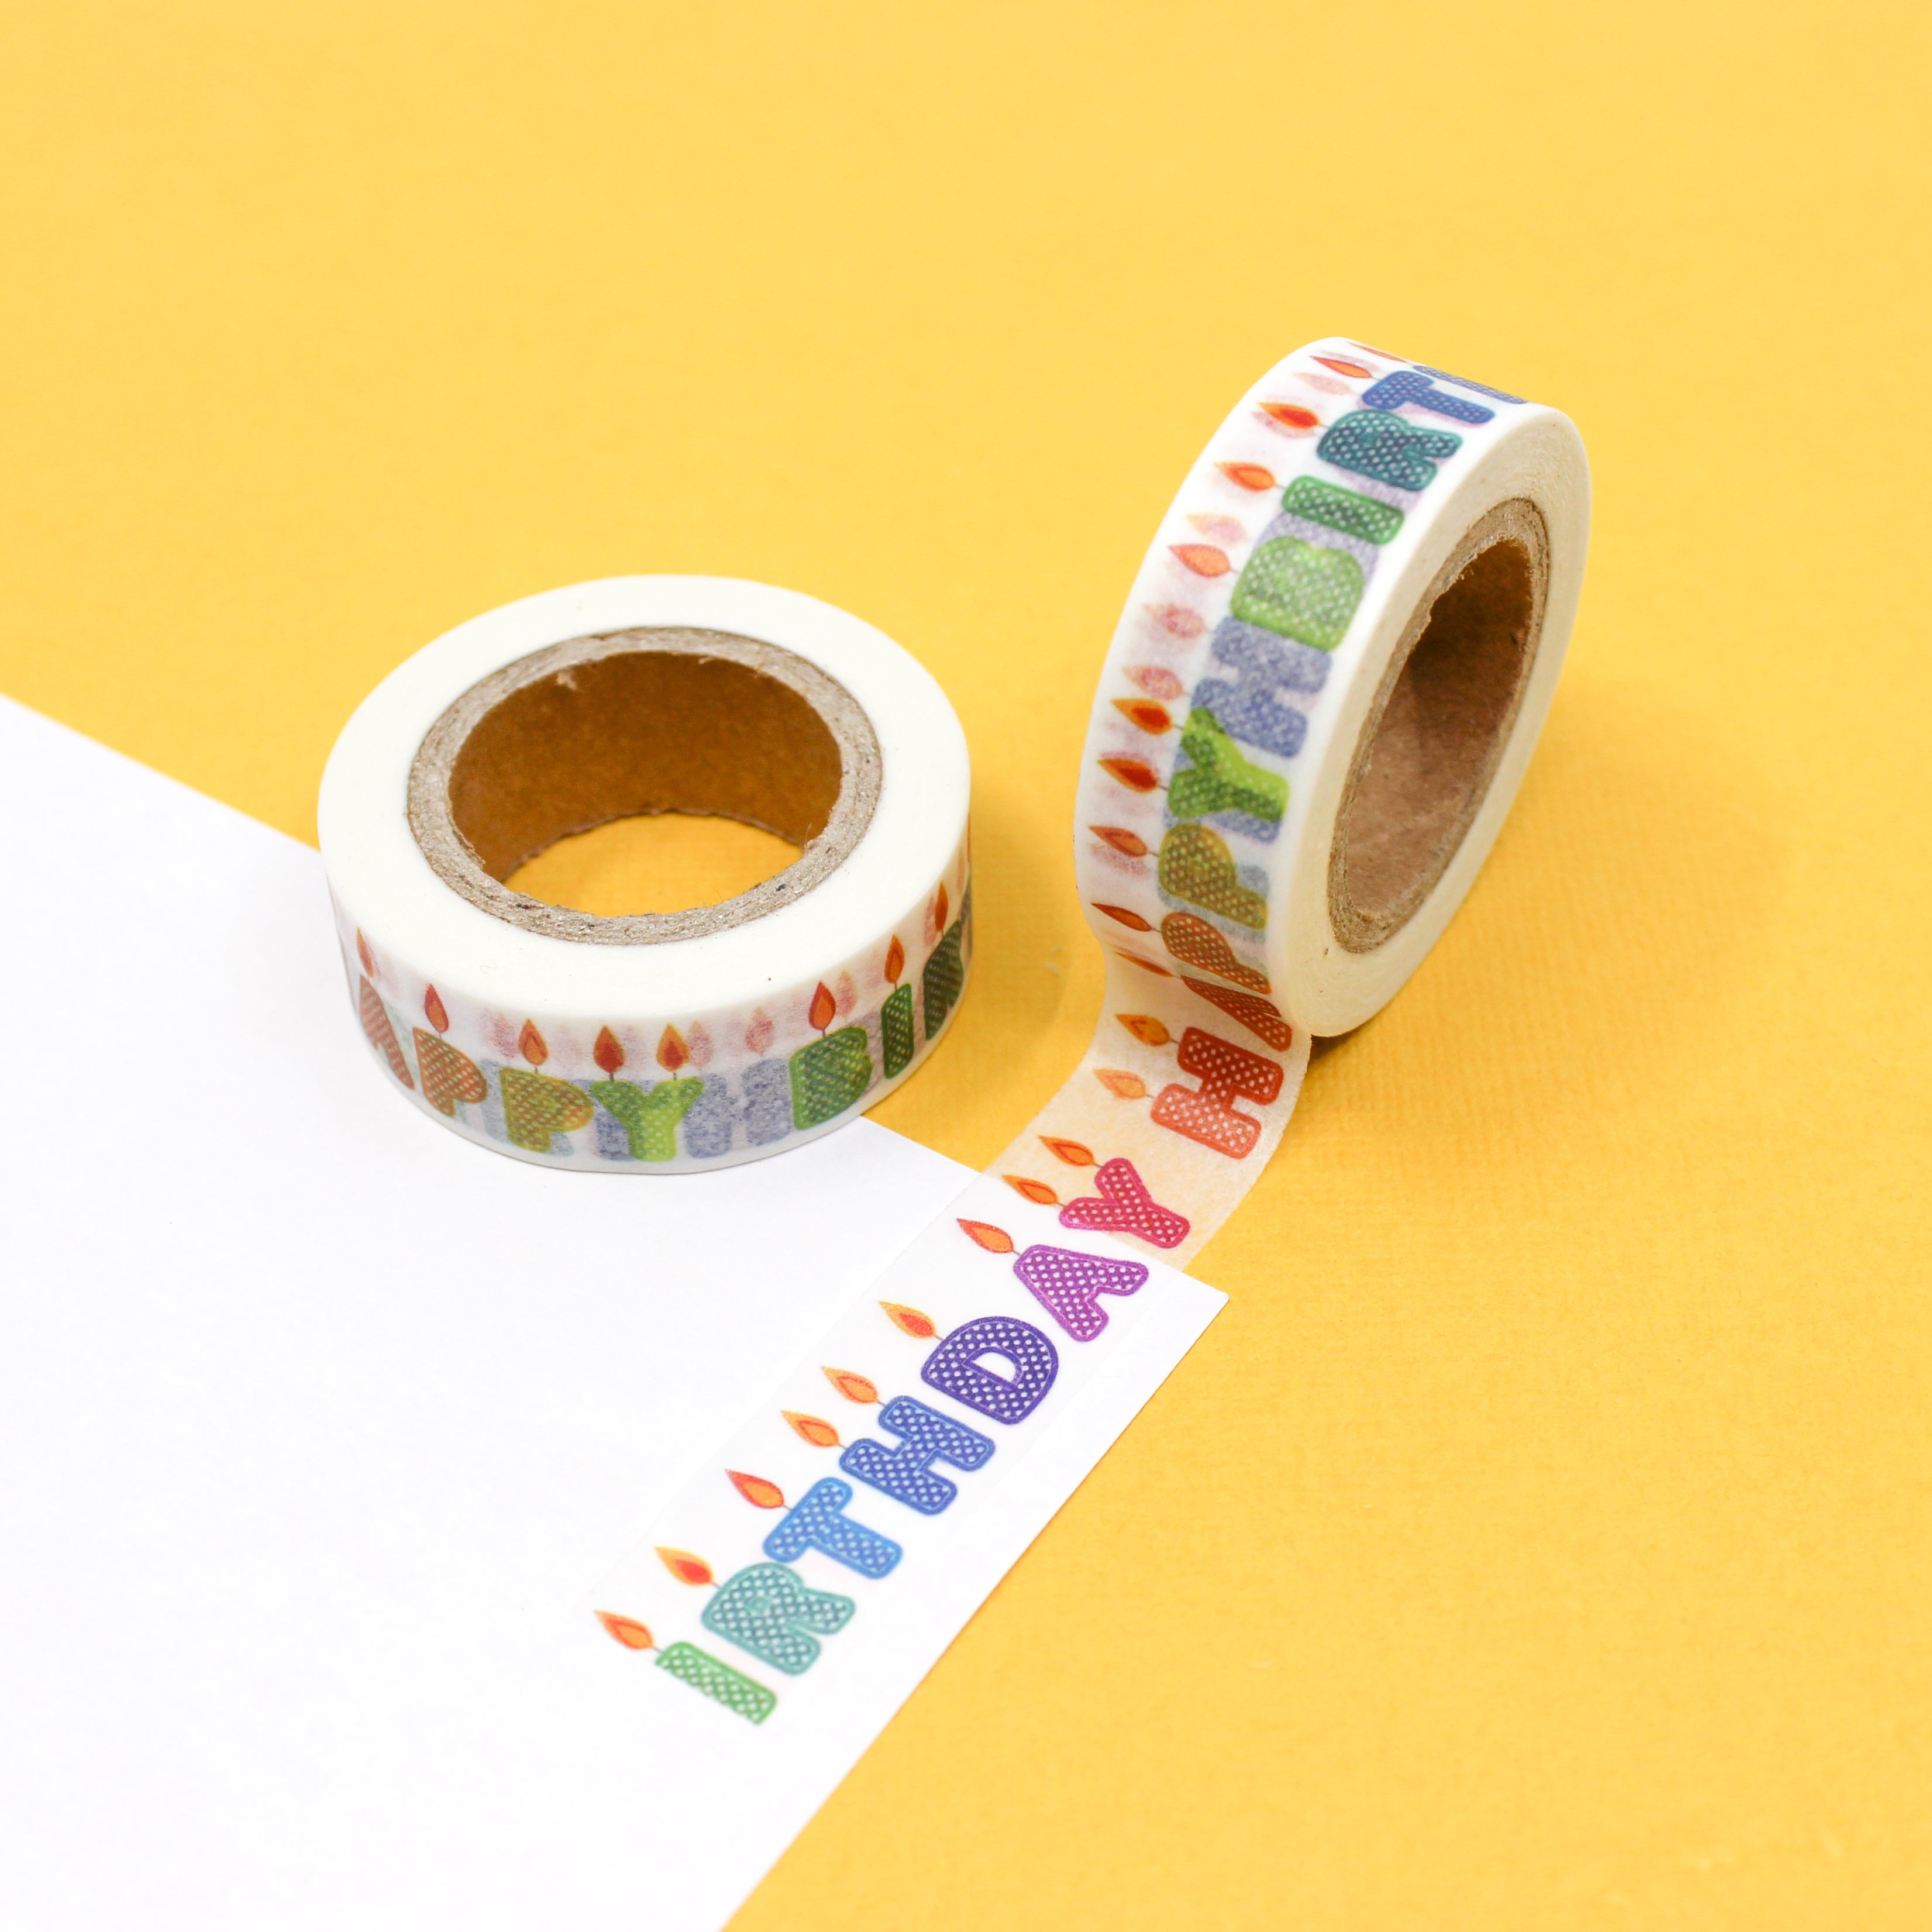 This is Happy Birthday text with candles themed washi tape from BBB Supplies Craft Shop